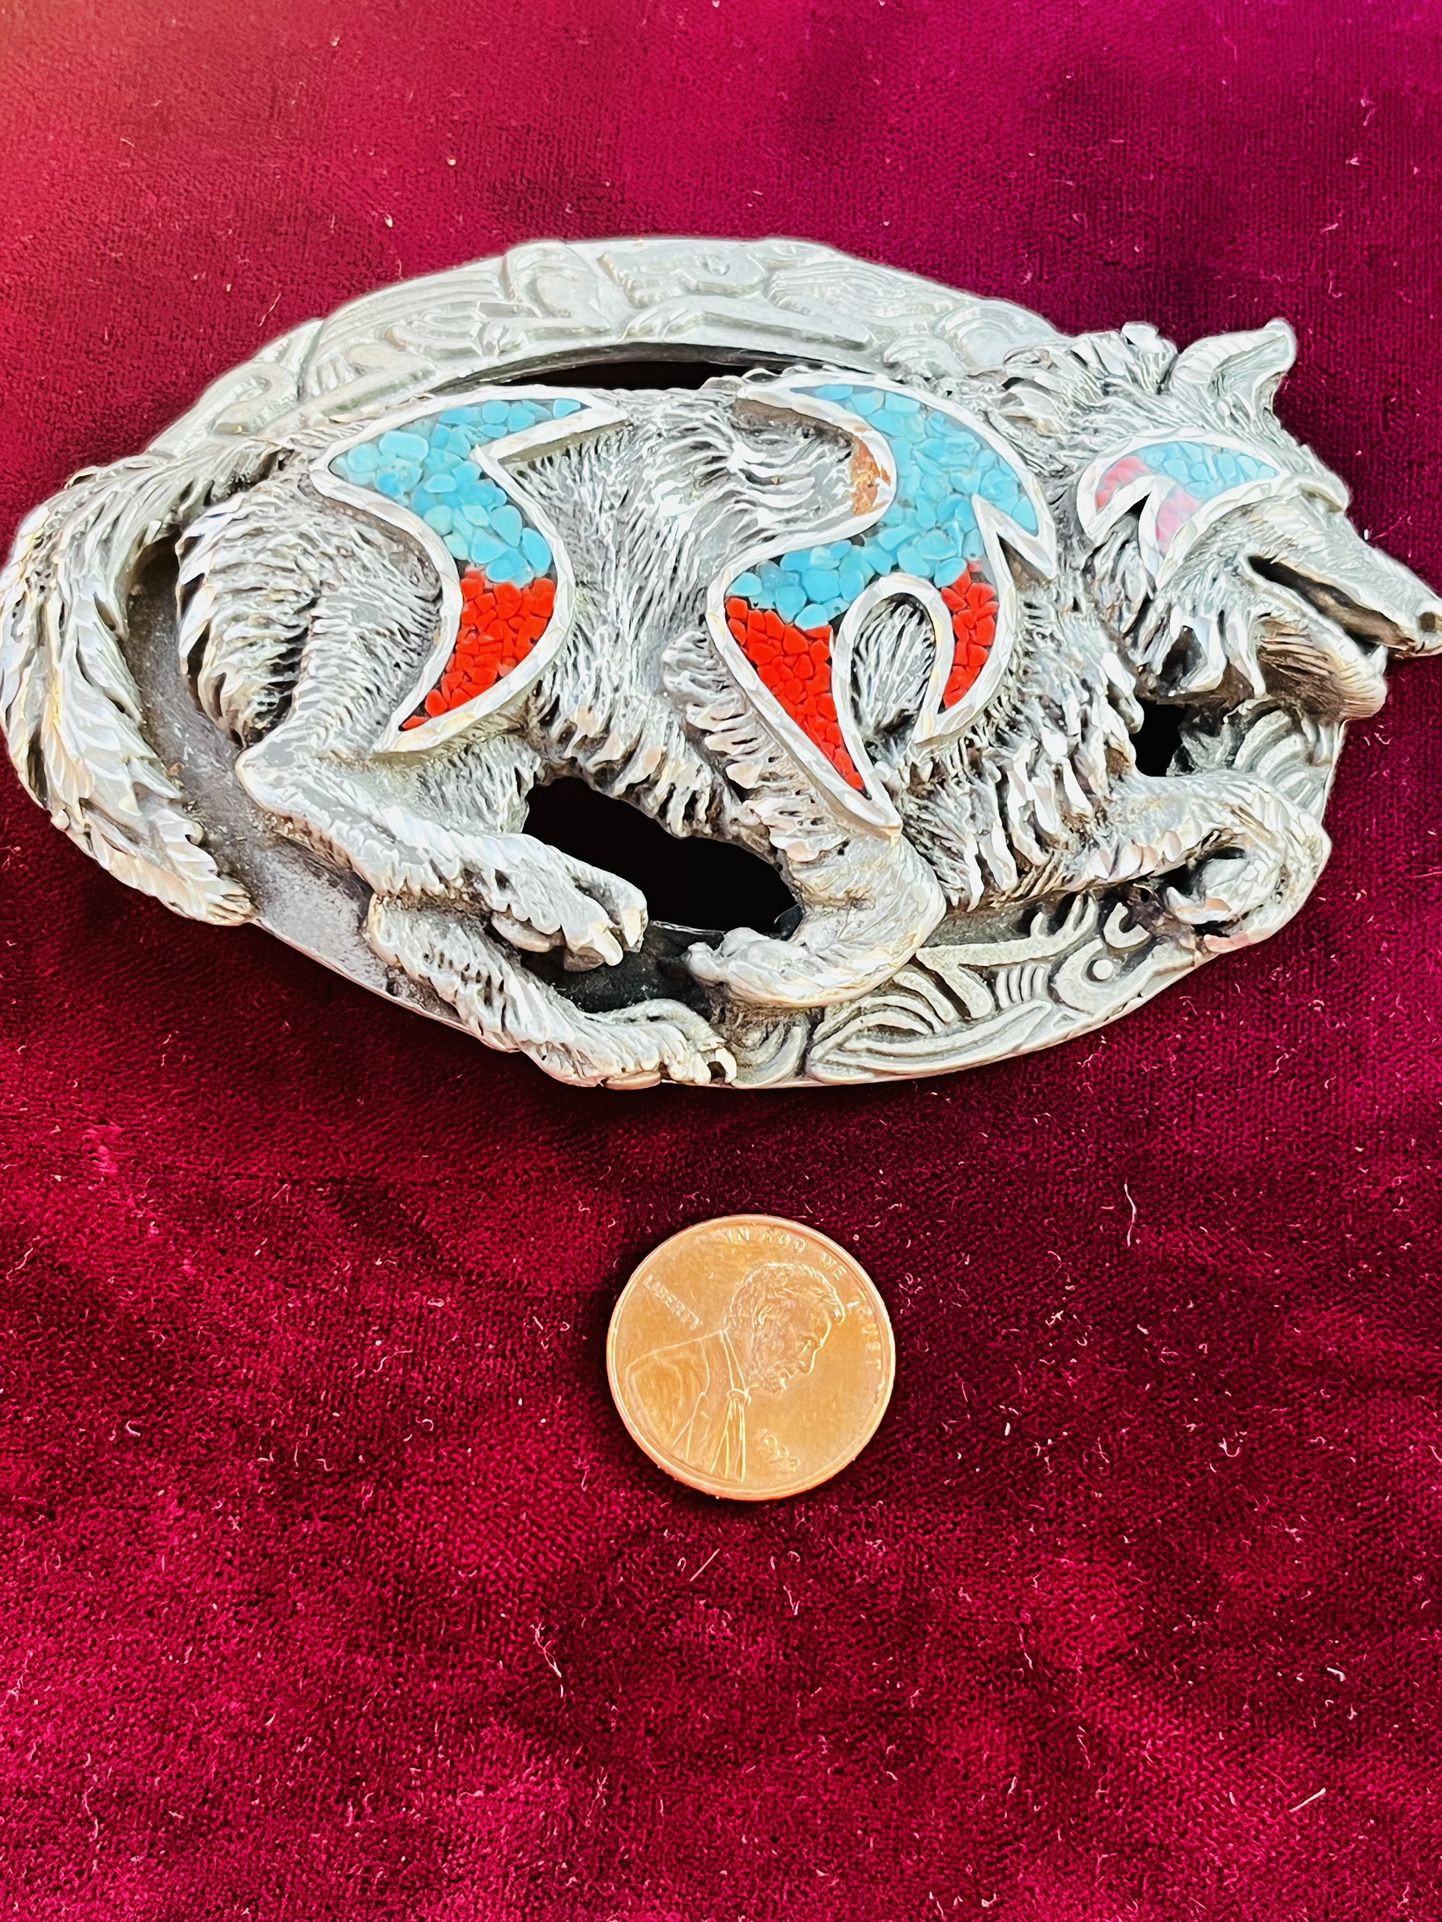 Belt buckle - Rare Nice Turquoise Enamel Silver Tune buckle of a running wolf Made In The USA with blue and red decorative stones